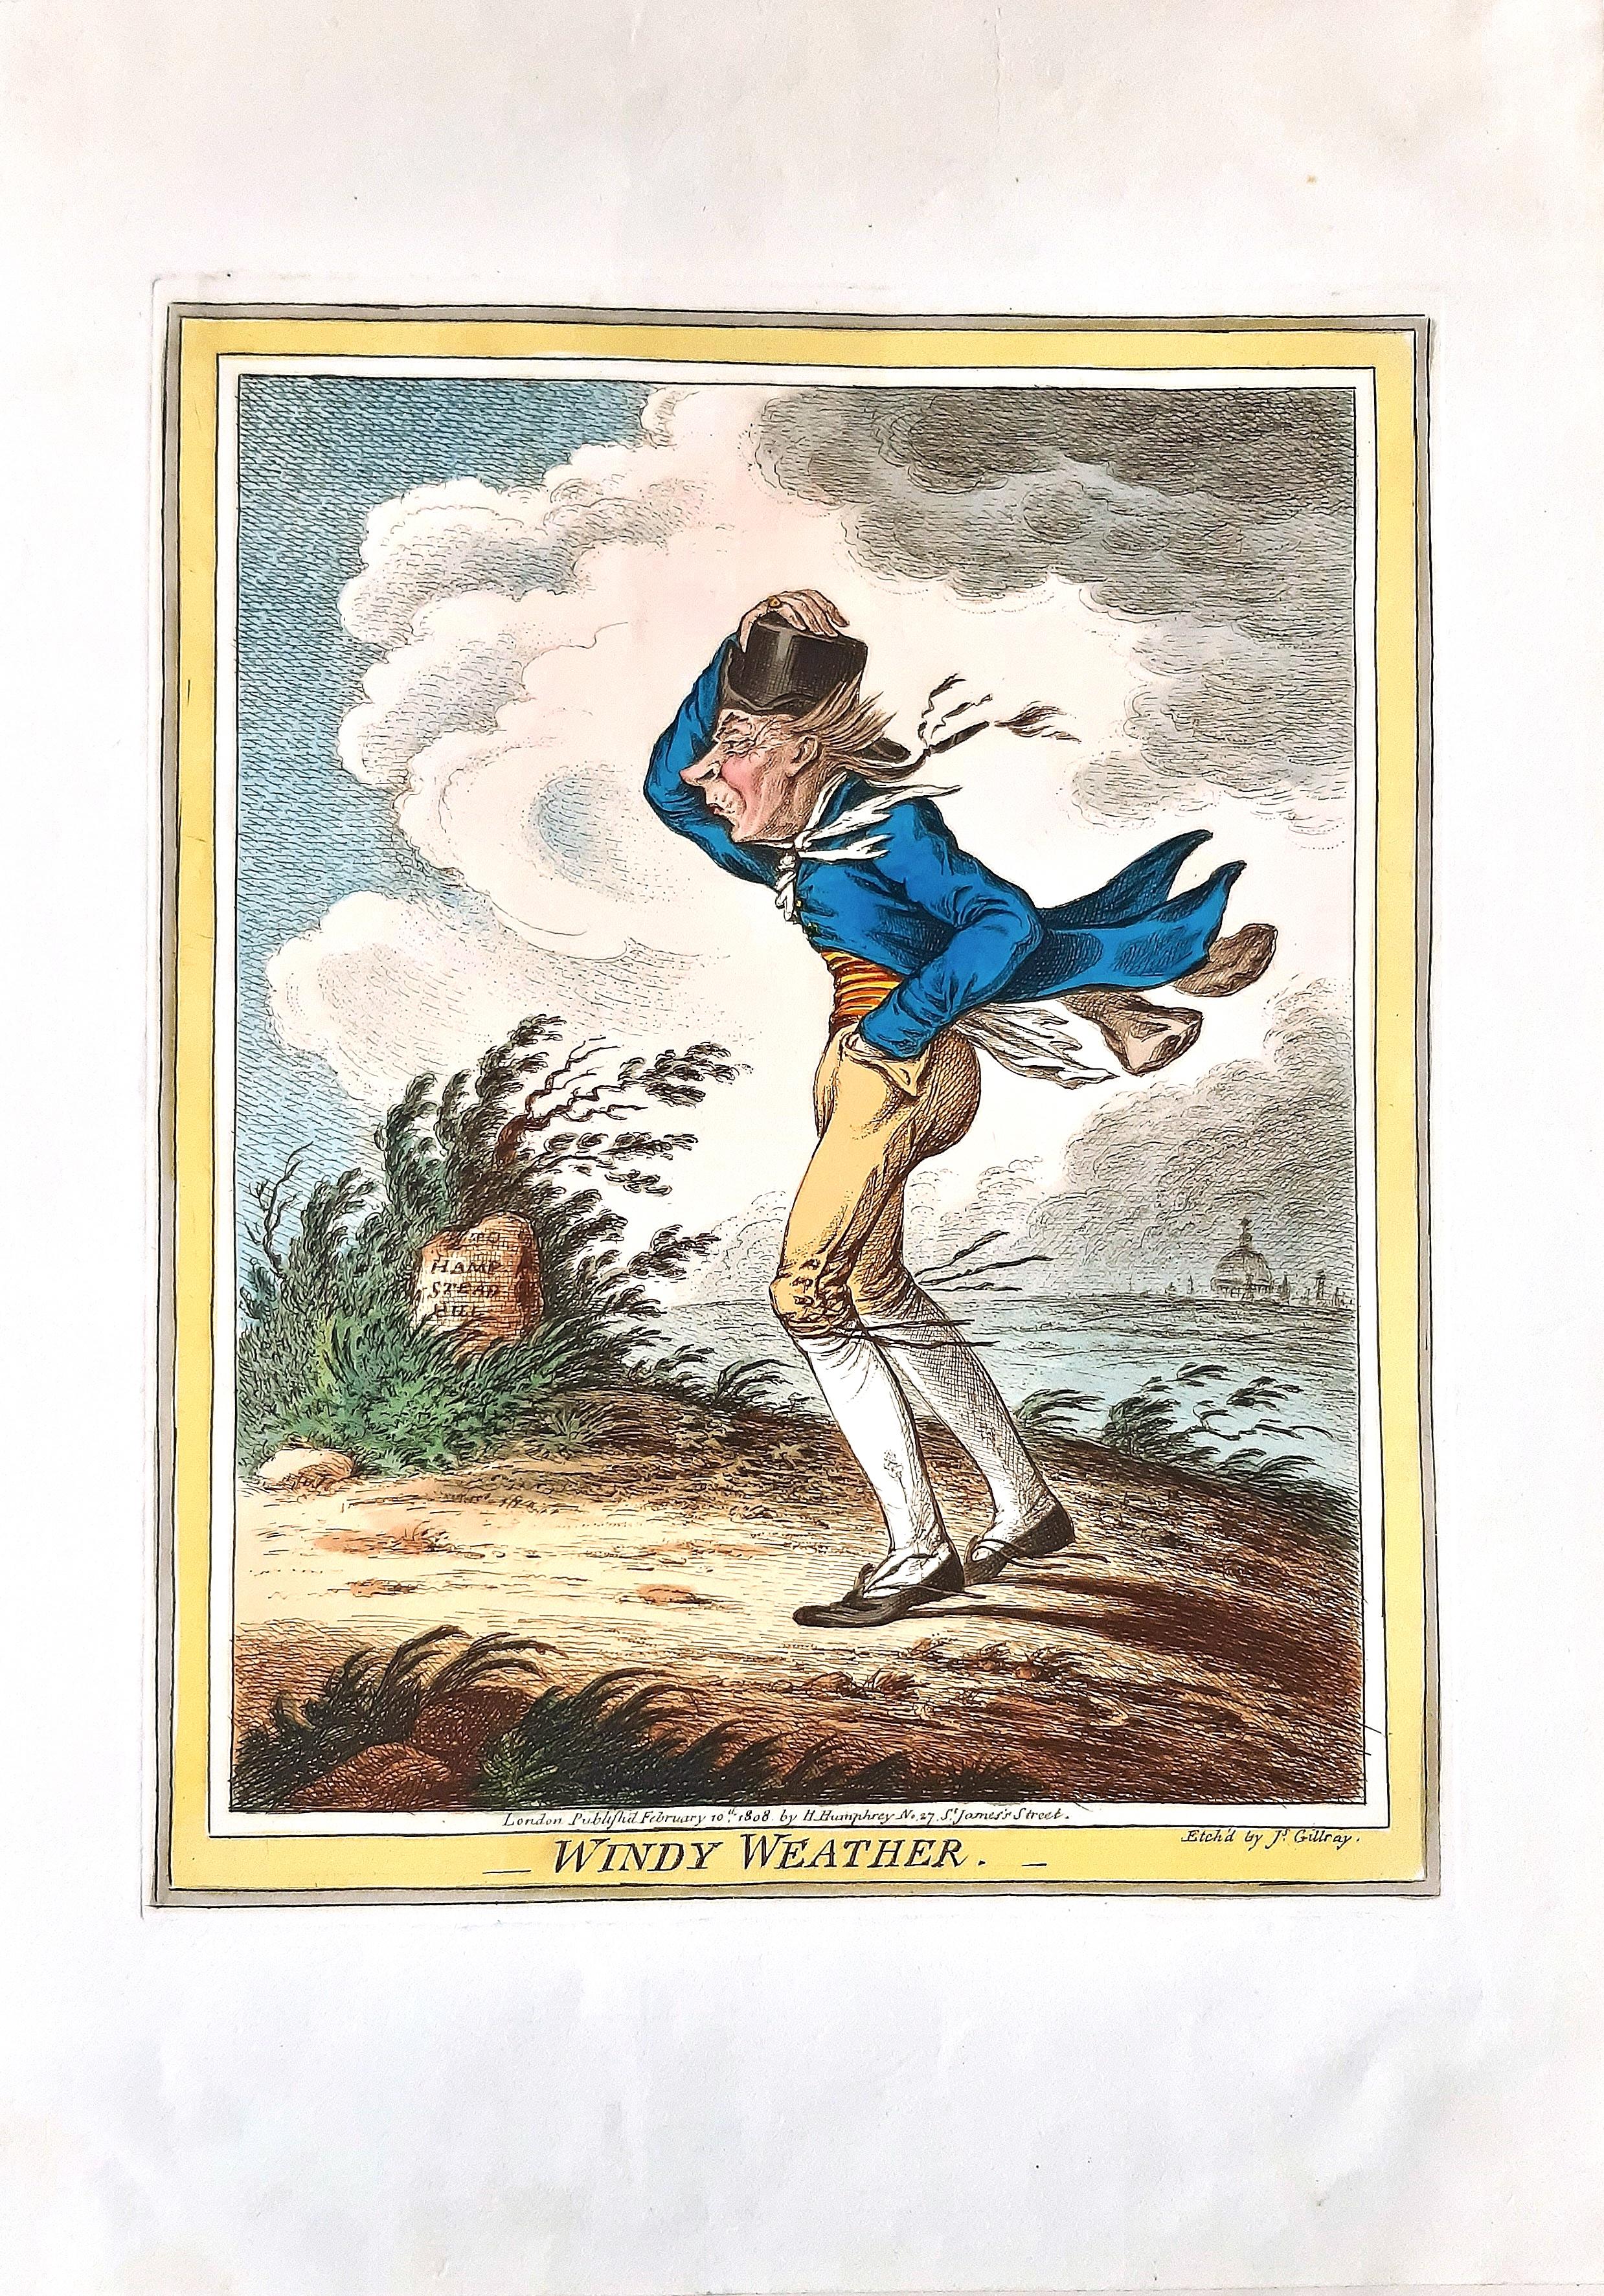 Delicious Weather - Complete Series of 5 Hand-colored Etchings - 1808 4